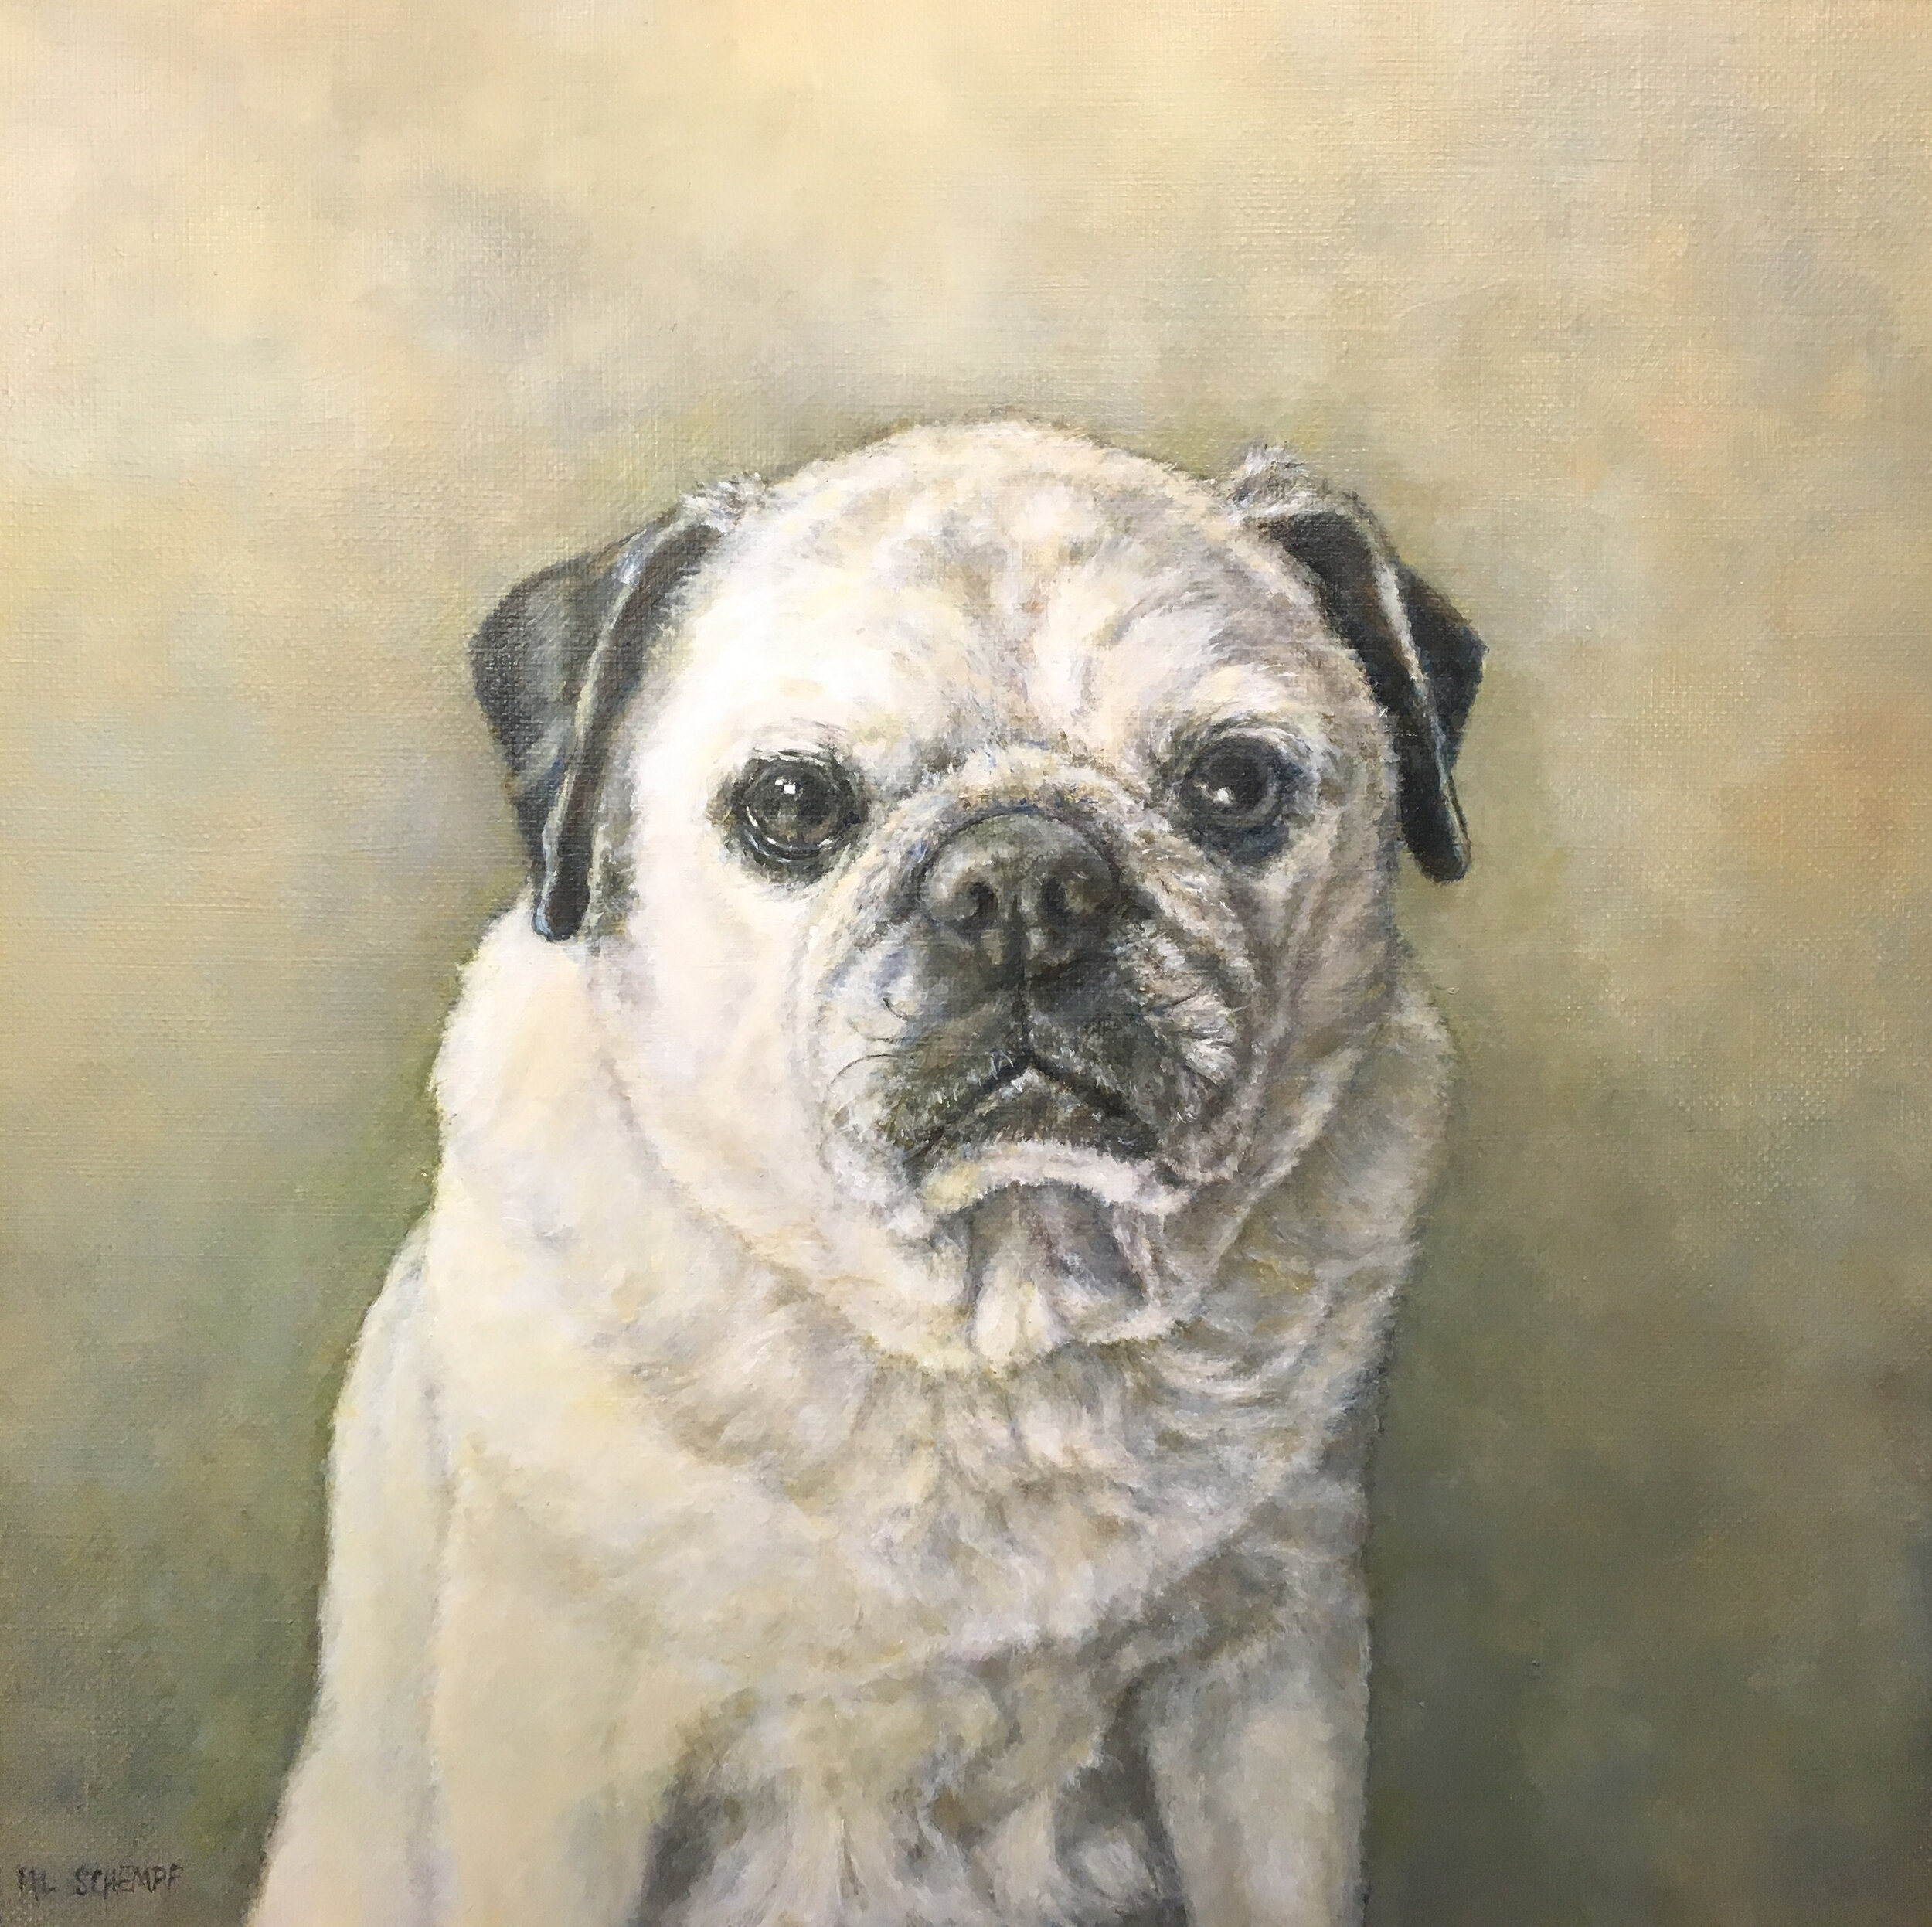  Mary Lou Schempf  Ollie,    12” x 12”, oil on linen   (private collection)  